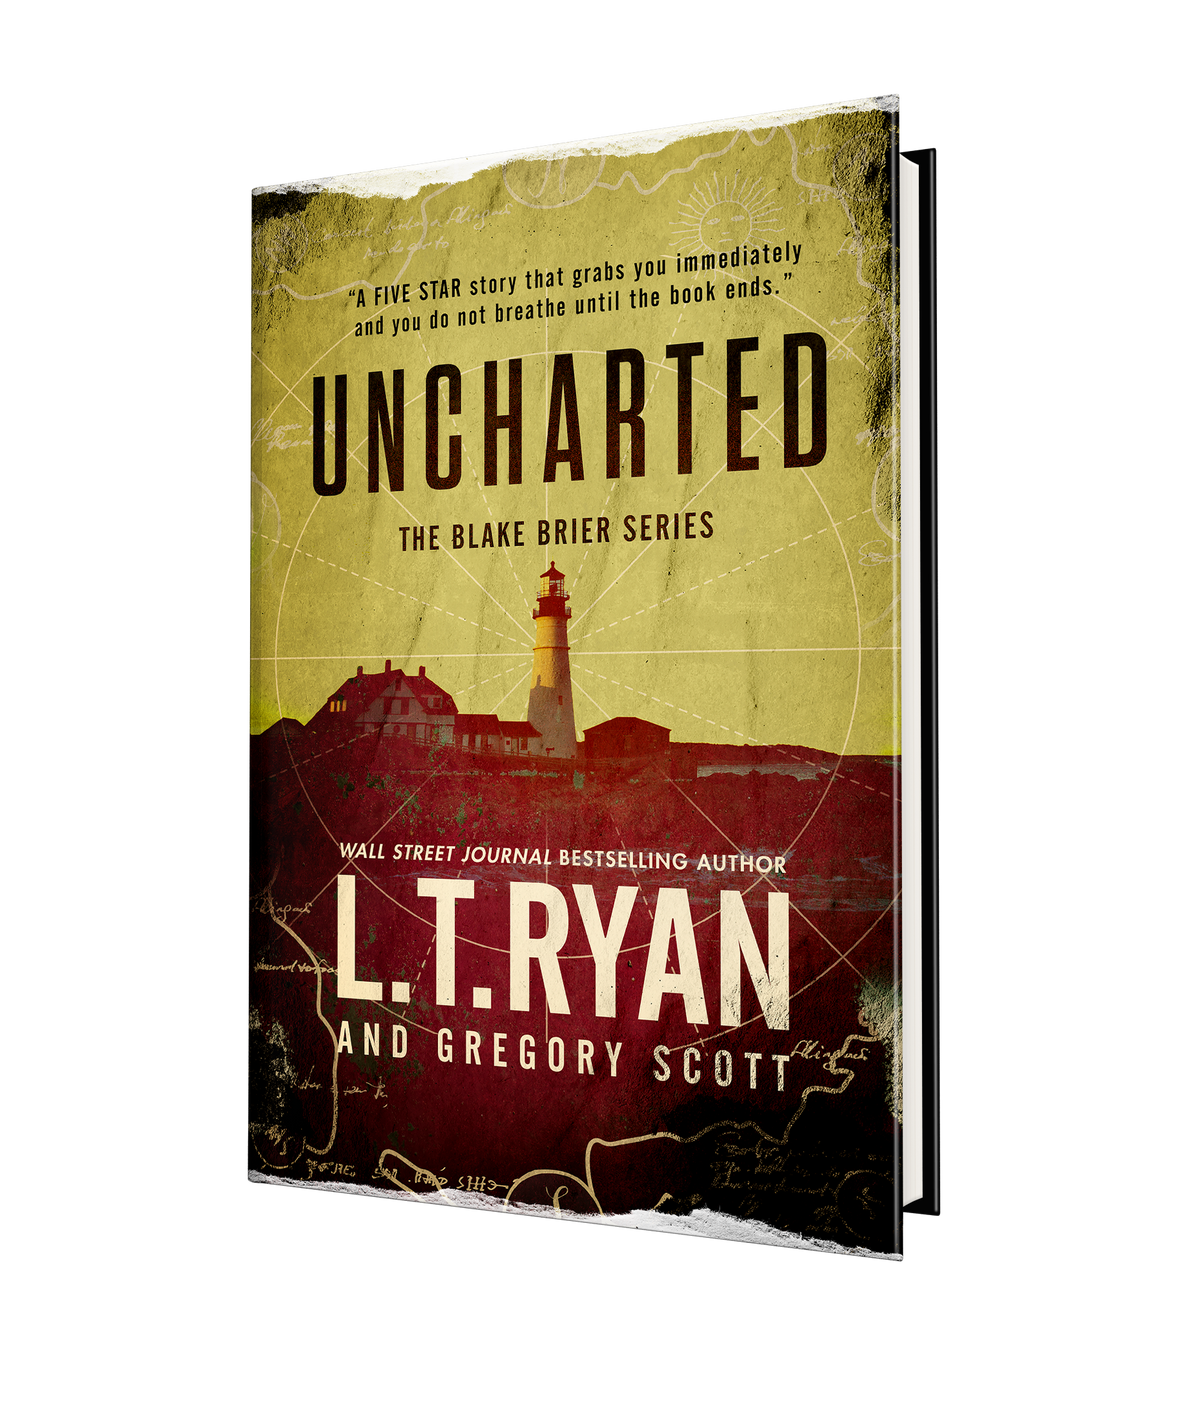 Uncharted: Signed by the Author